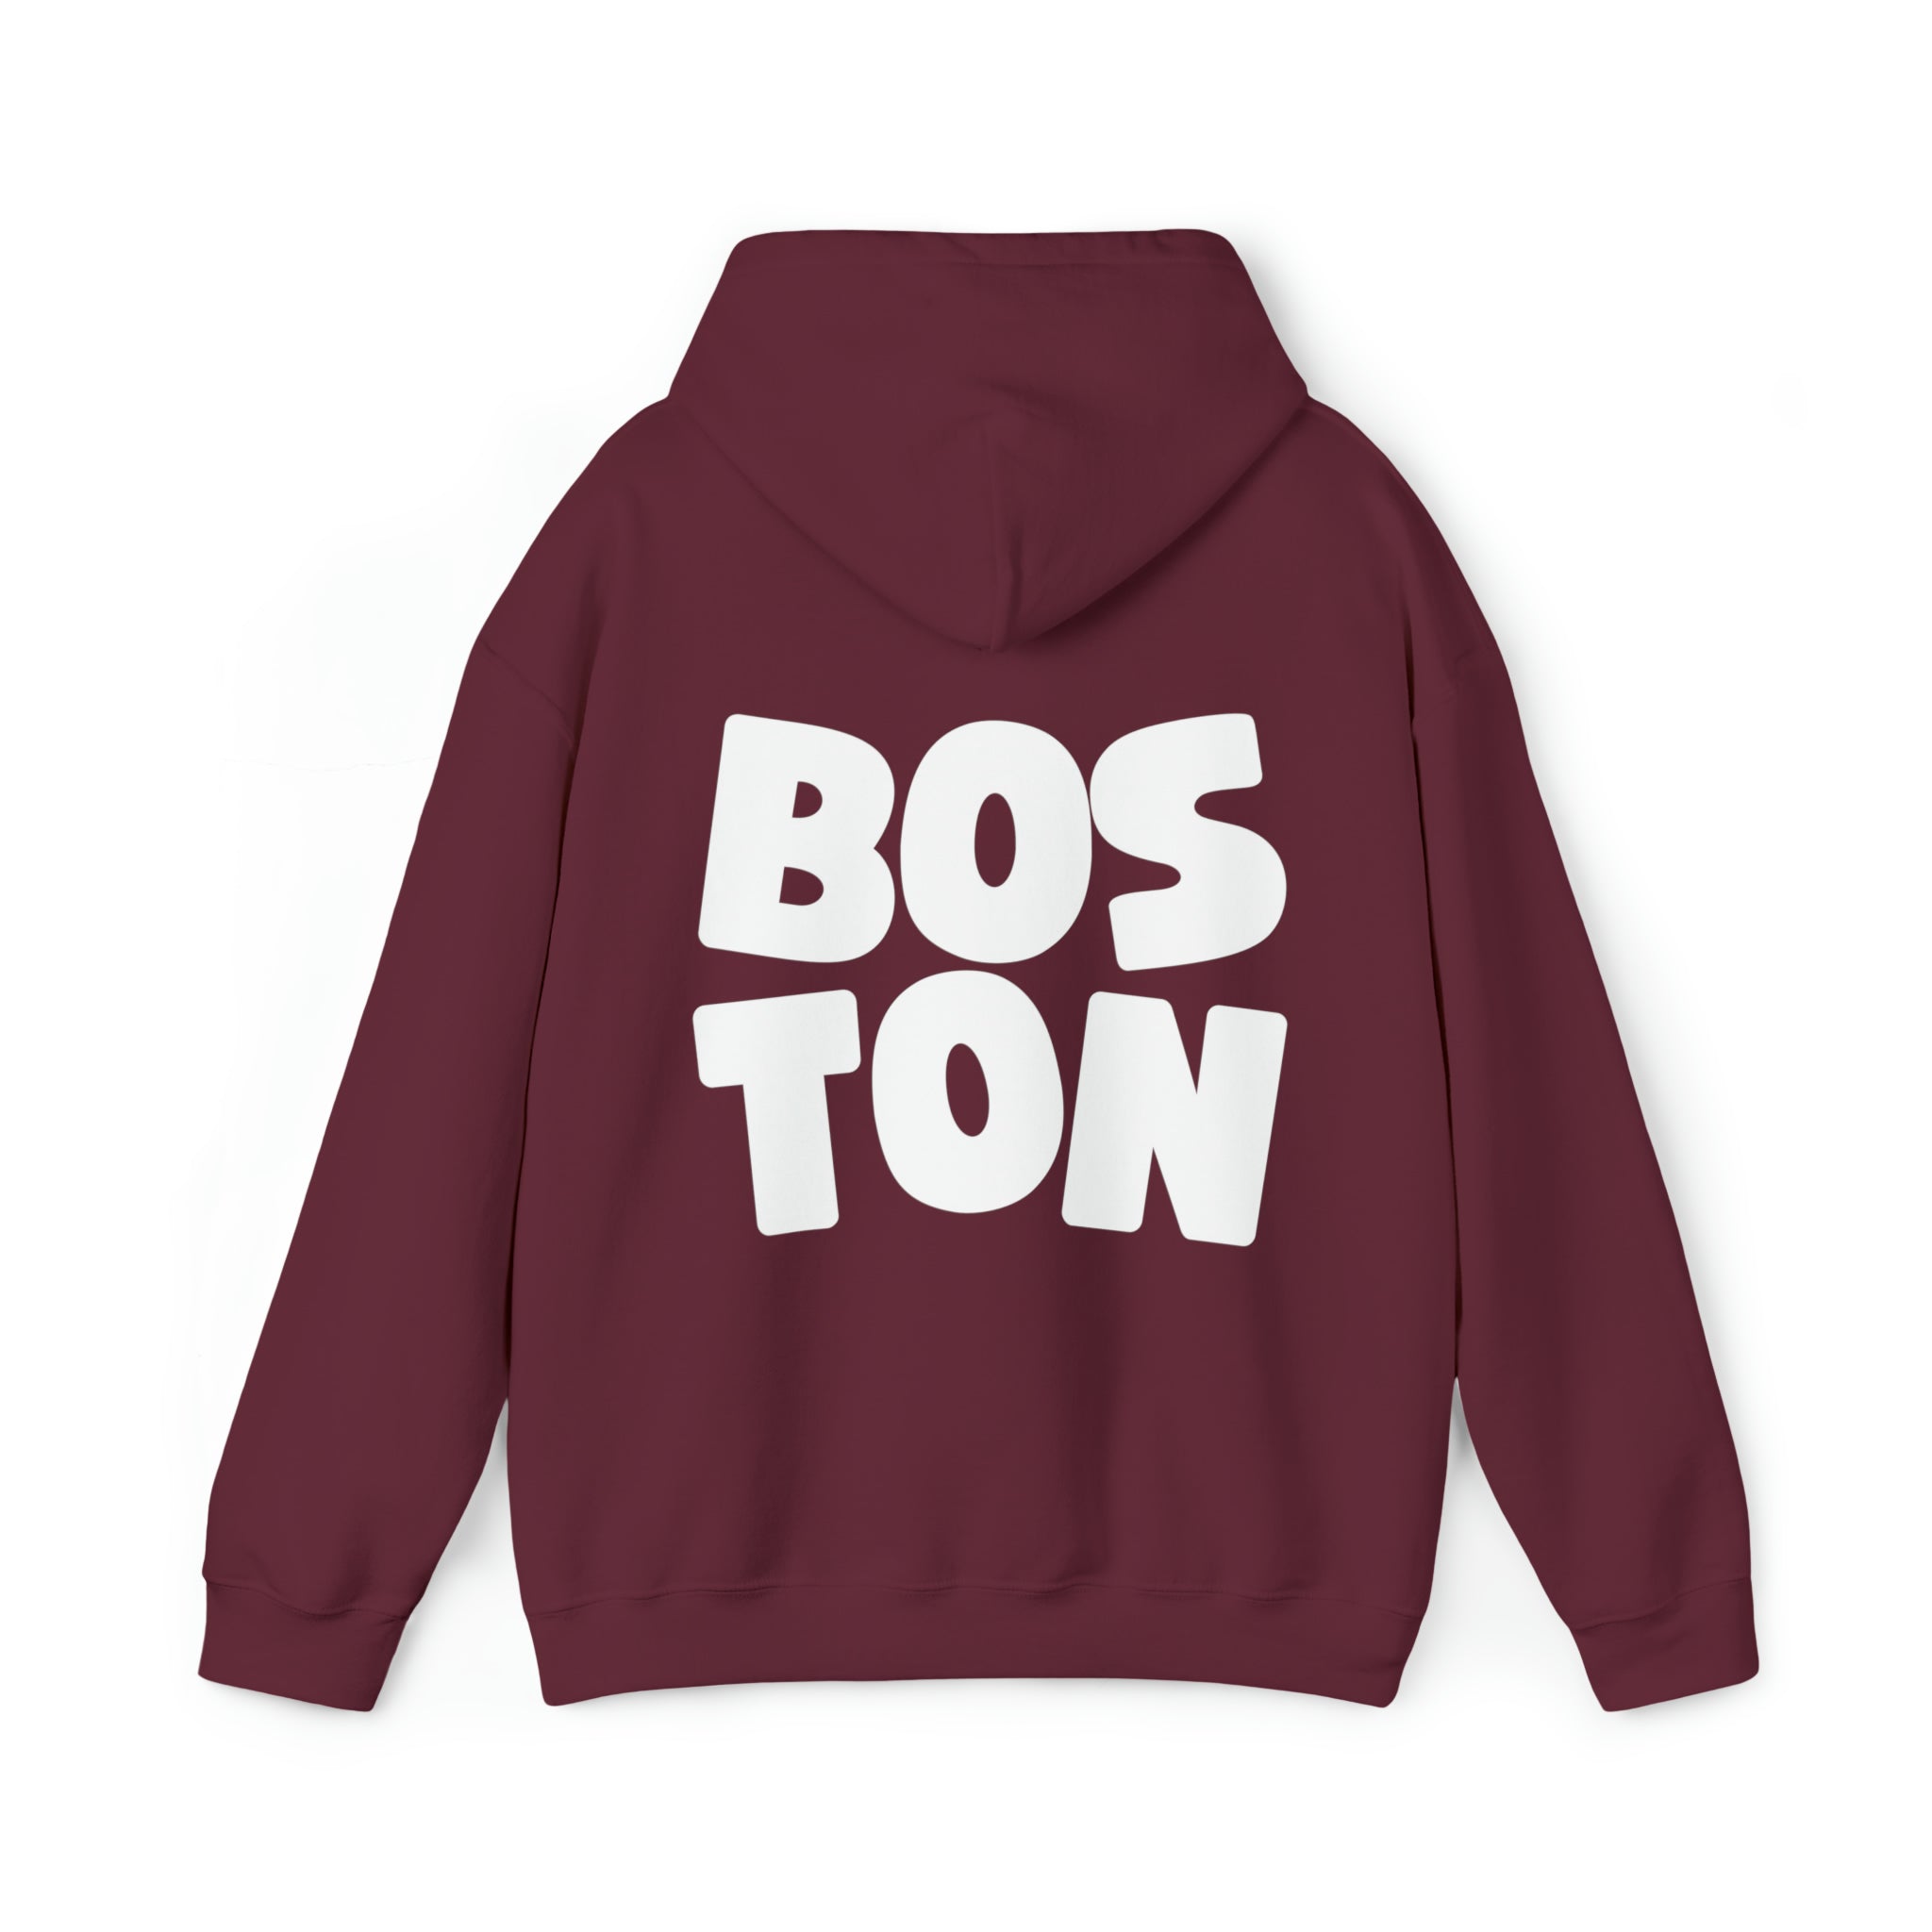 Casually draped Boston Hoodie from GS Print Shoppe on a chair, suggesting a relaxed and comfortable style.